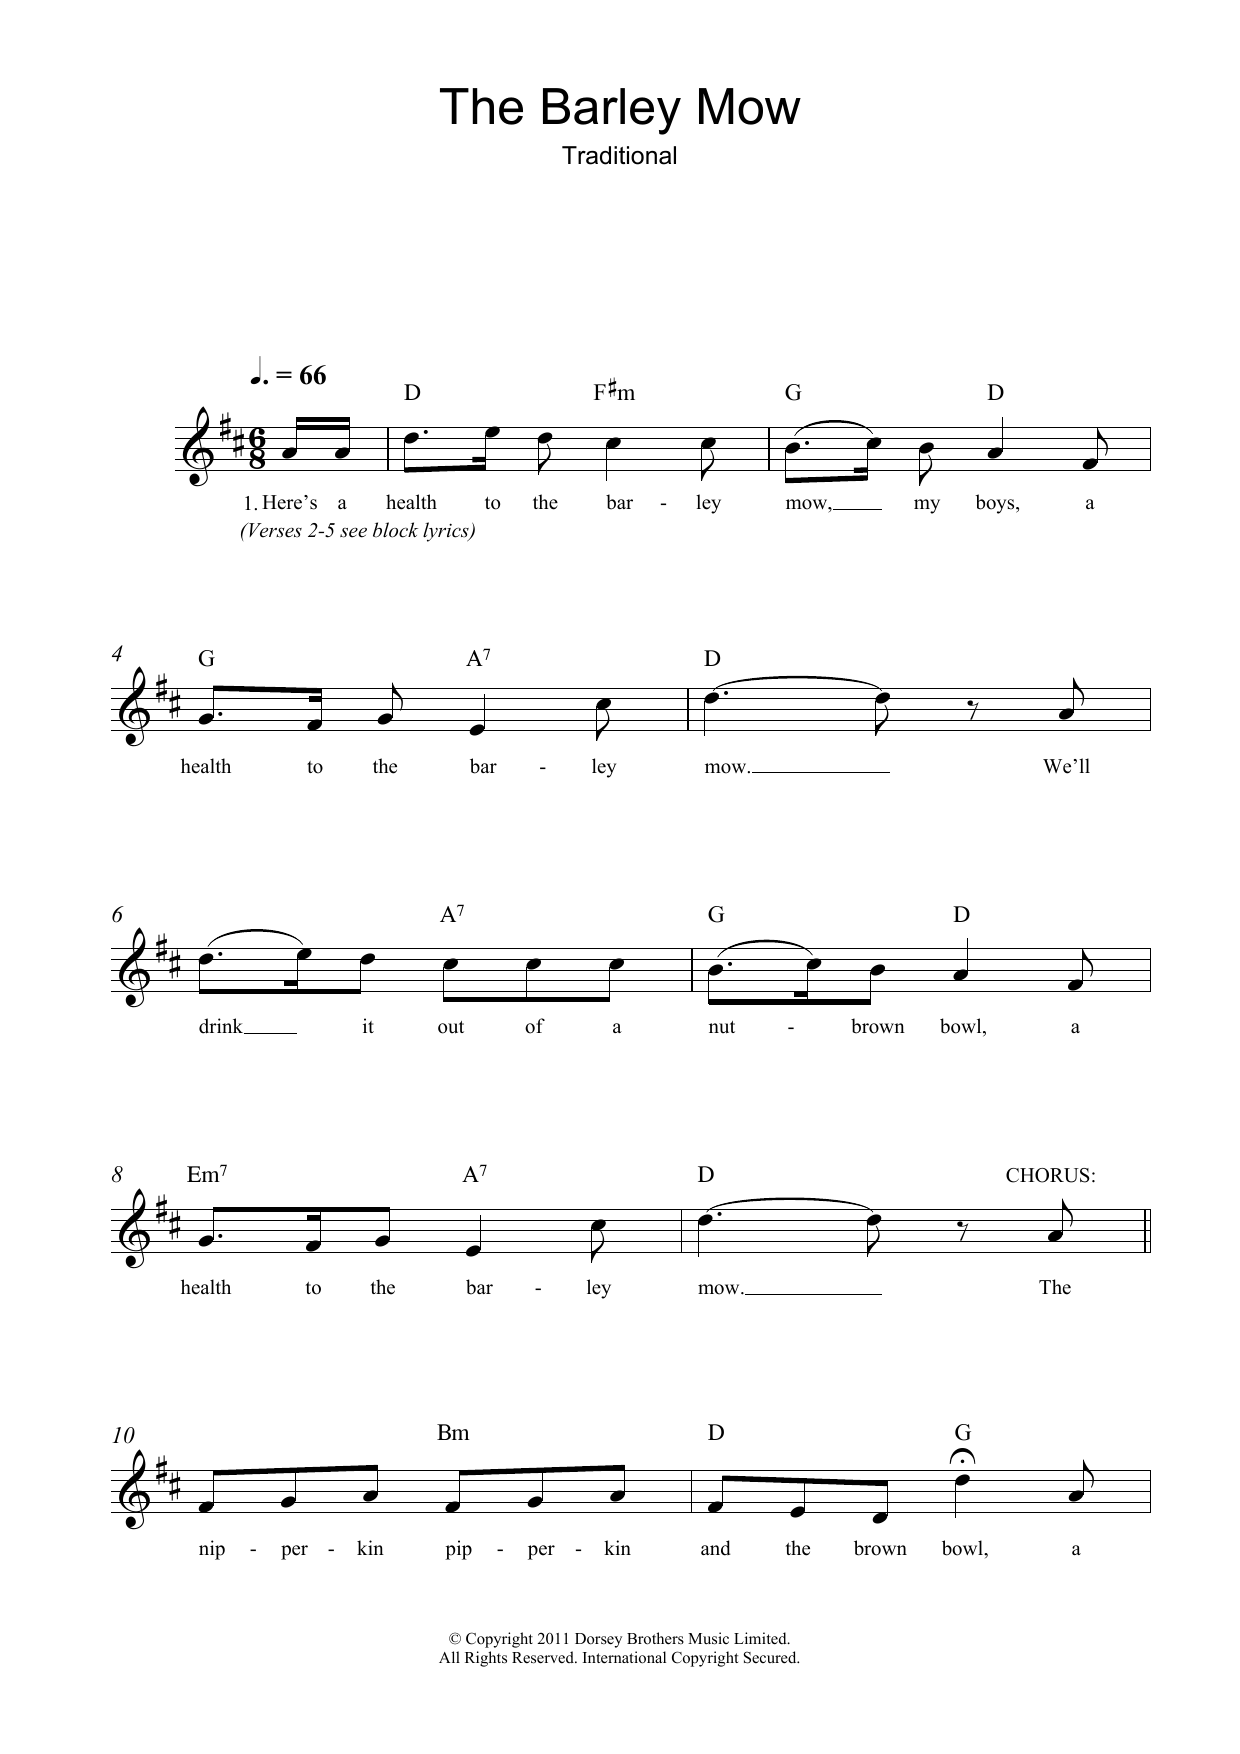 Download Traditional The Barley Mow Sheet Music